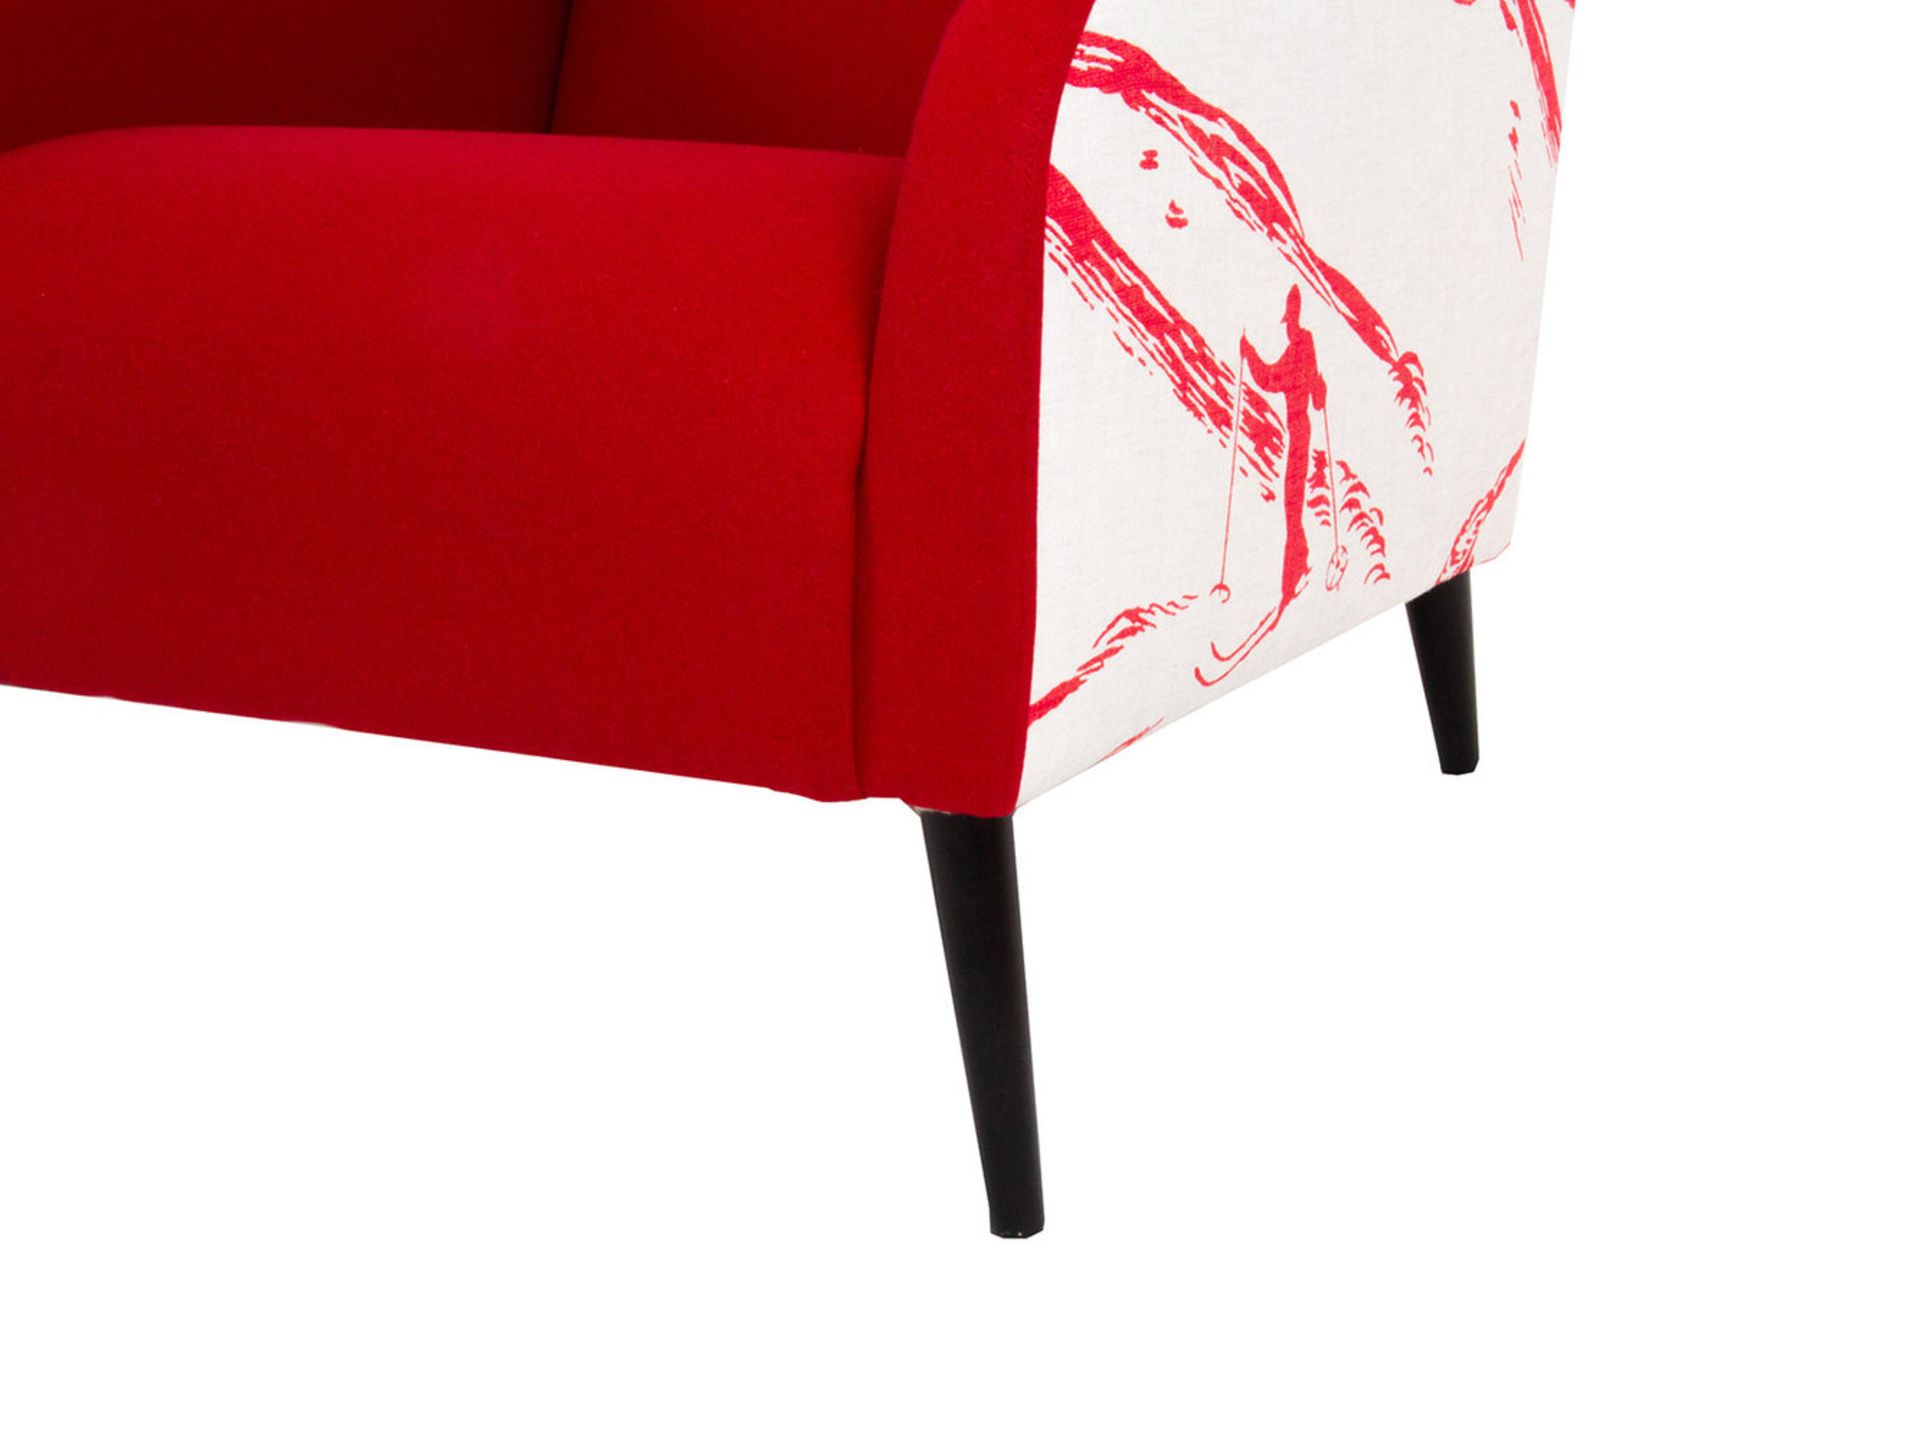 1 x Lauran Armchair Upholstered in Aviemore Skiing Fabric in Red and White - RRP £779! - Image 5 of 7